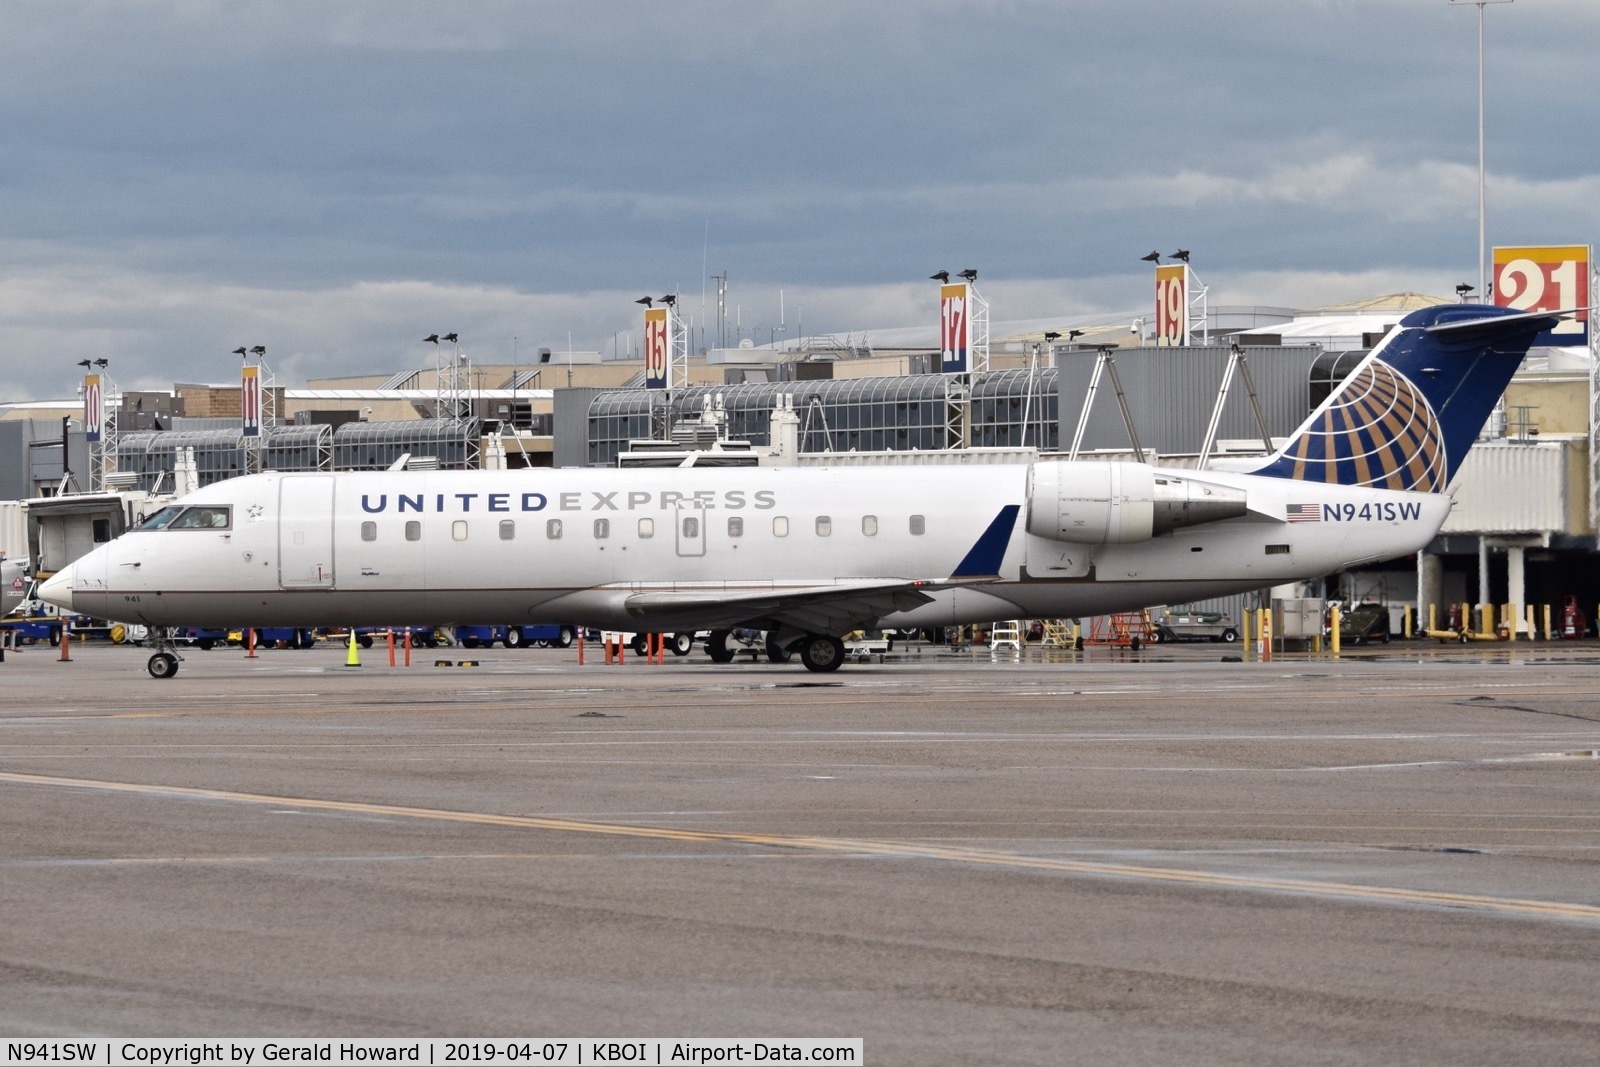 N941SW, 2003 Bombardier CRJ-200LR (CL-600-2B19) C/N 7750, Taxiing from the gate to RWY 10L.